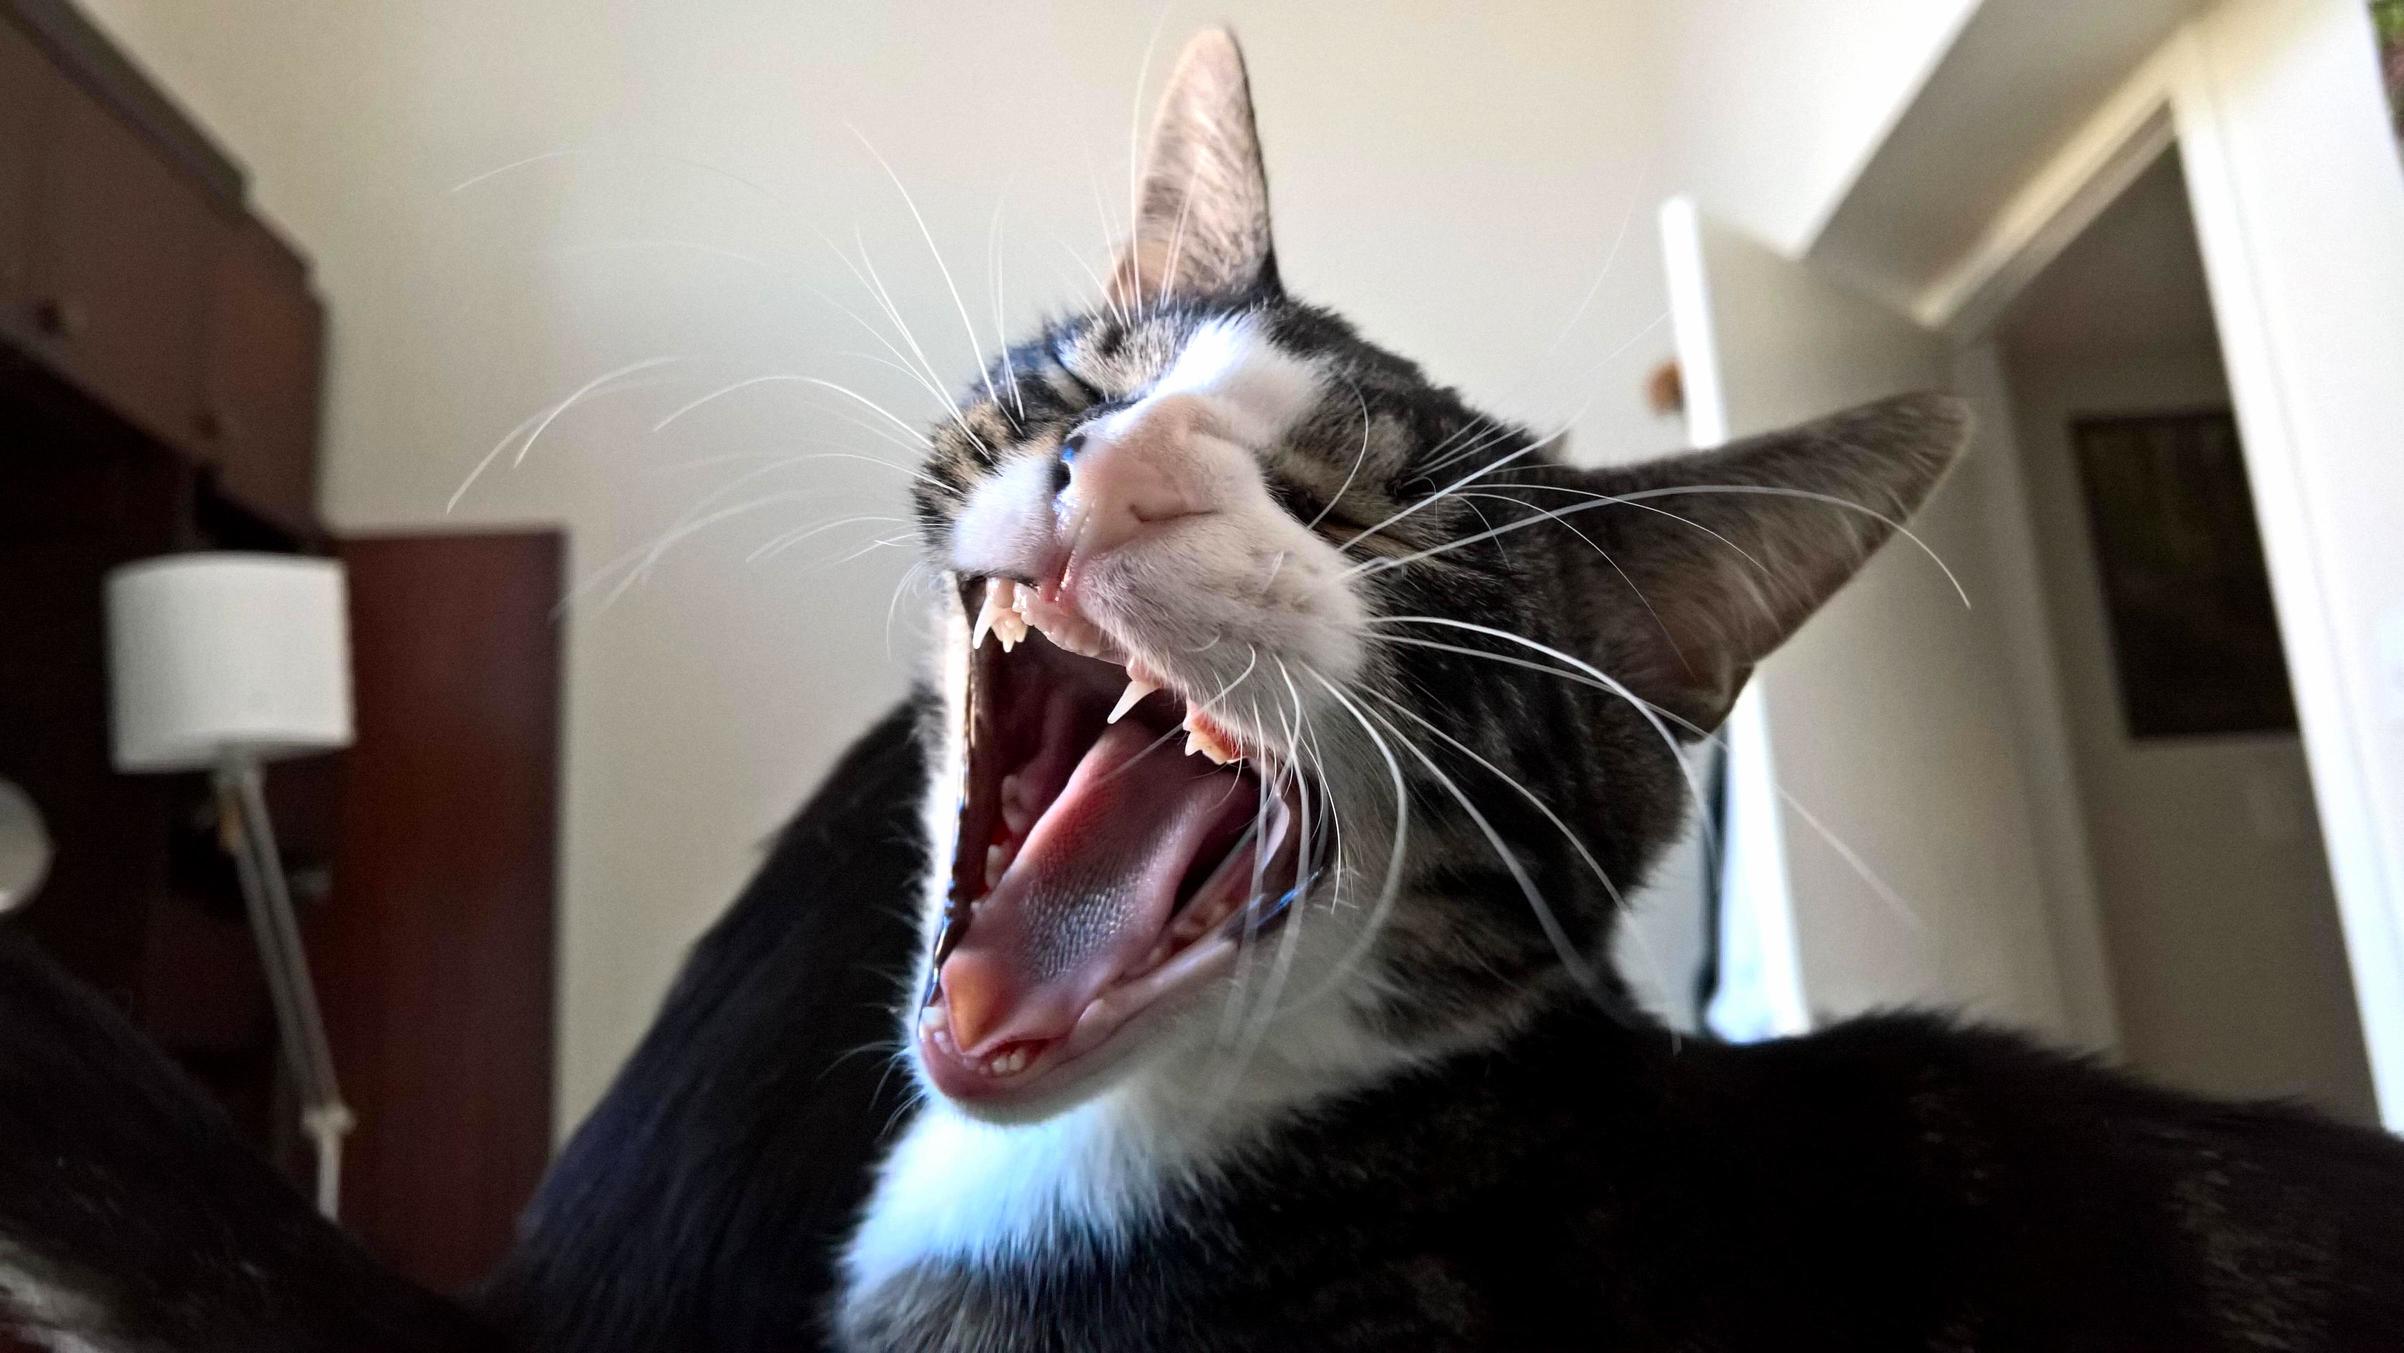 That rare moment when you catch the perfect kitty yawn in focus.